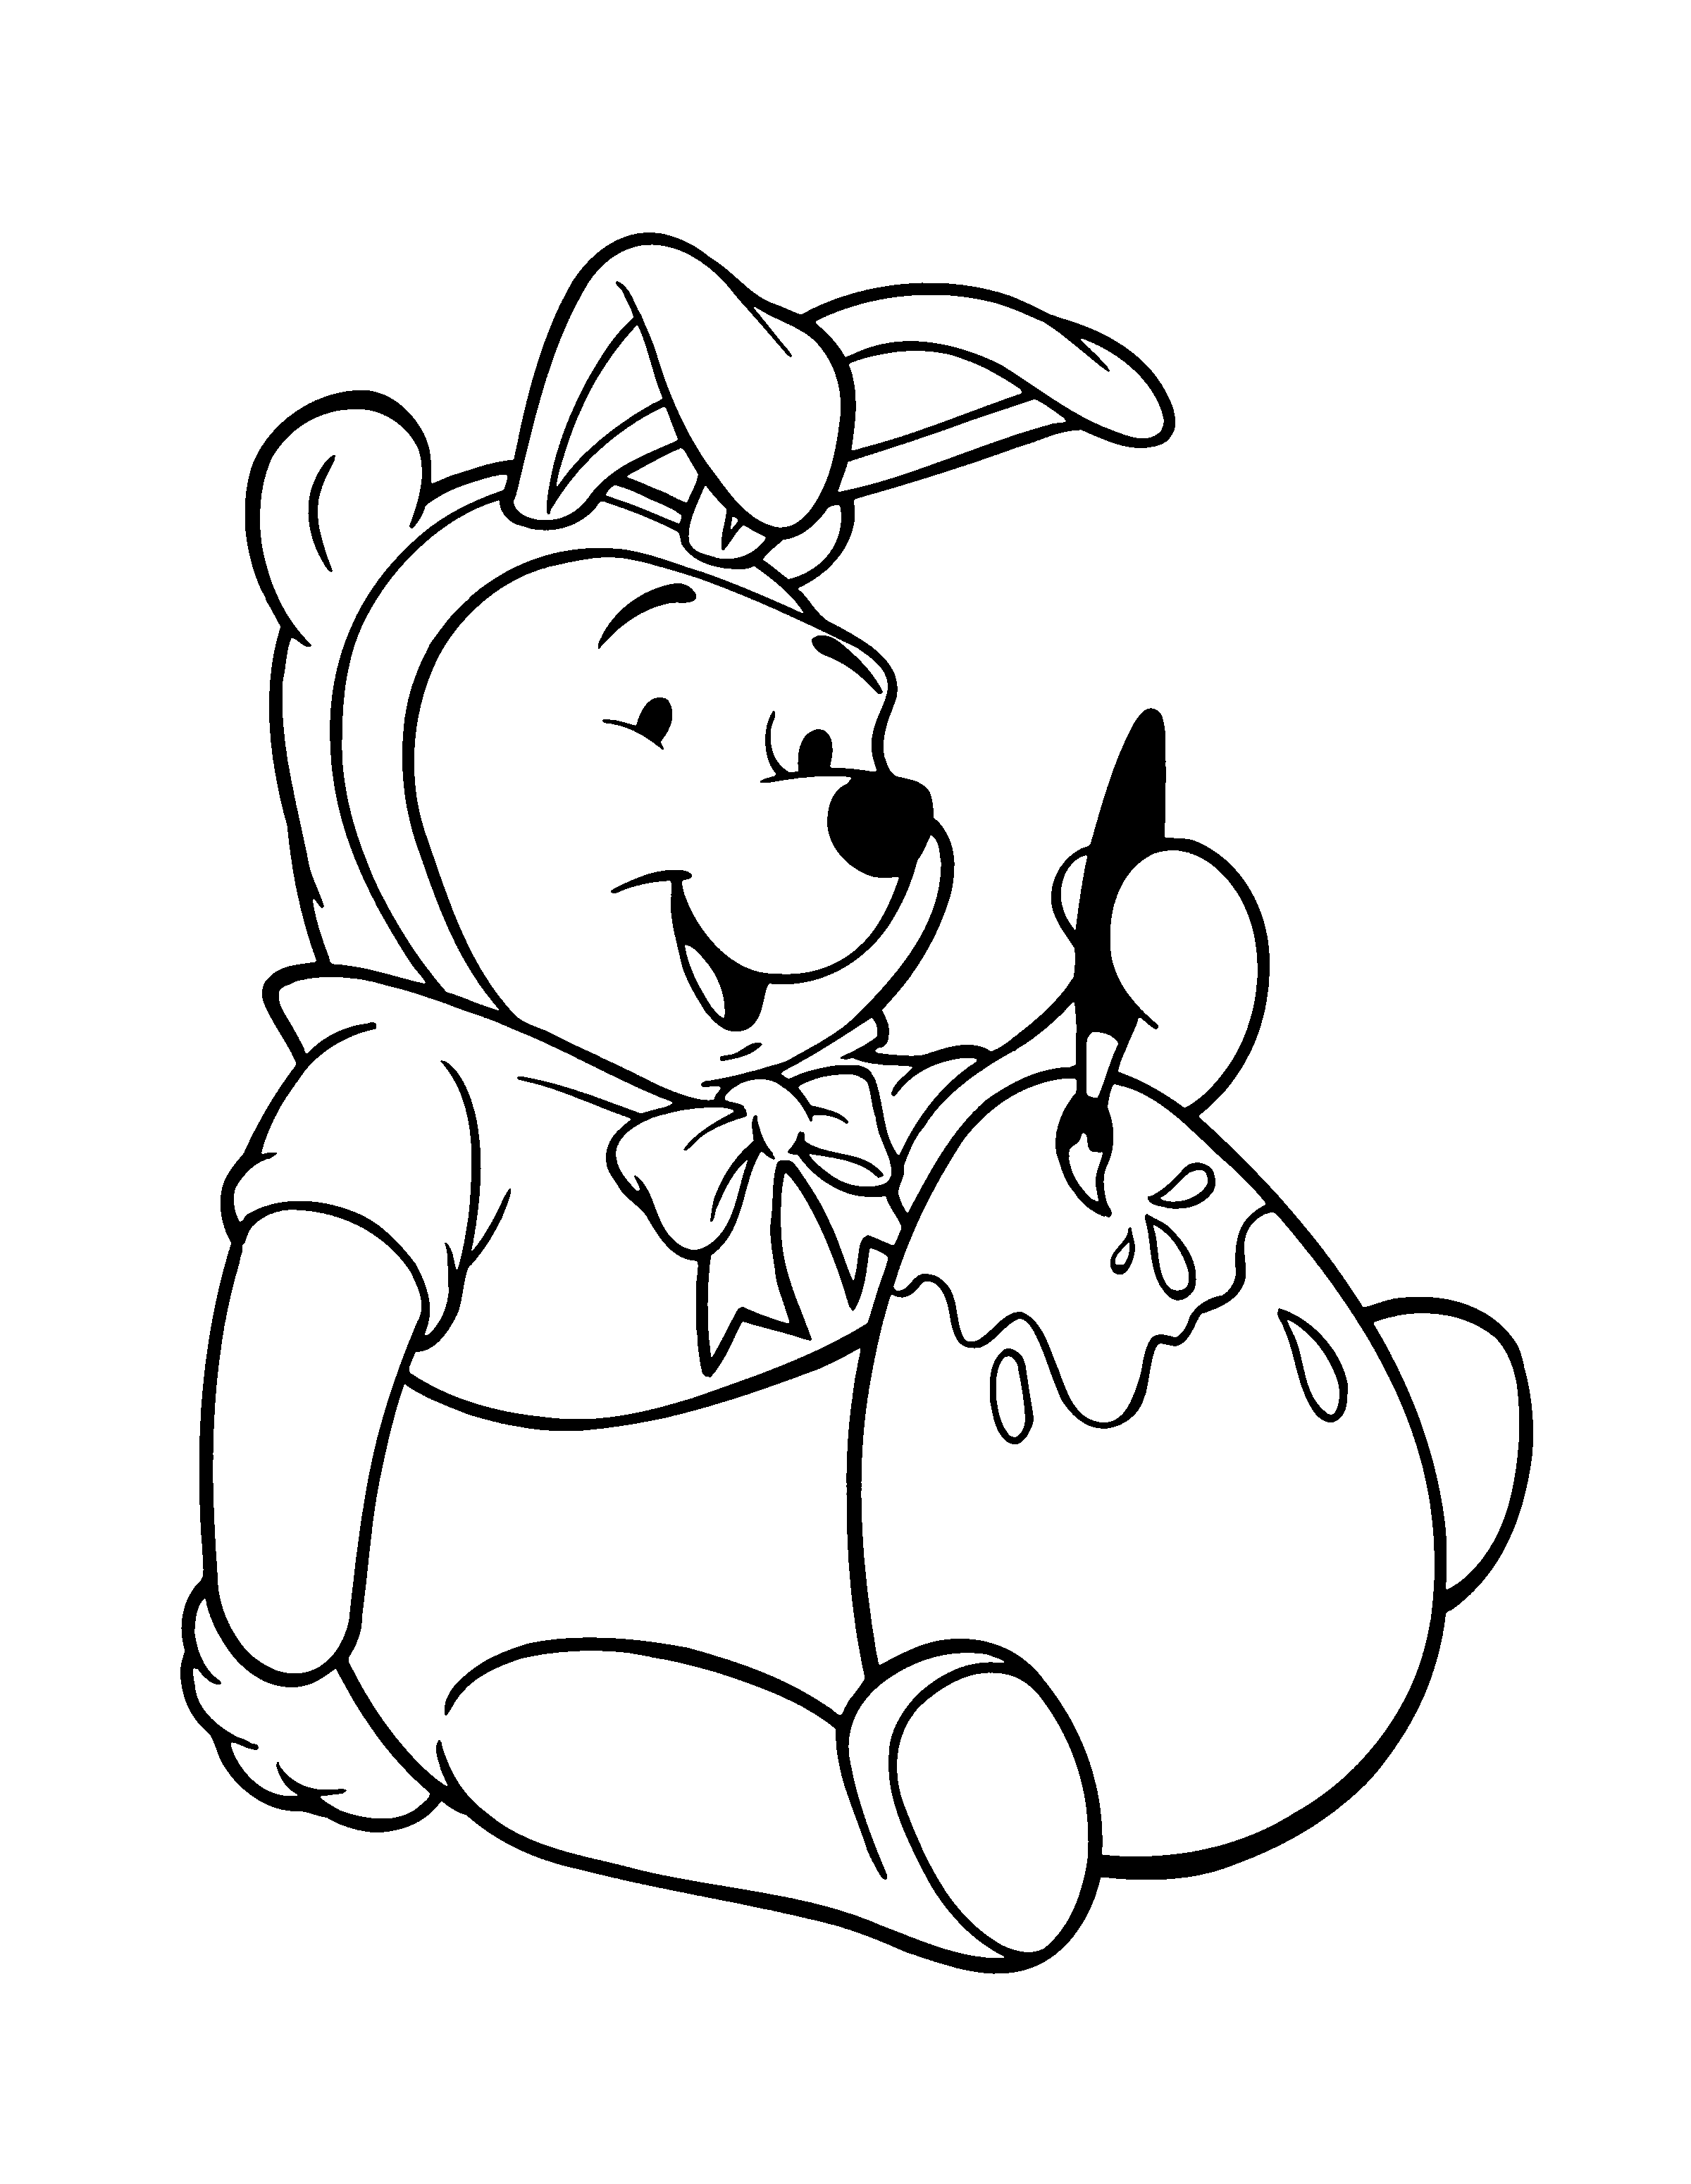 pooh bear coloring pictures lovely classic pooh bear coloring pages given amazing coloring bear pictures pooh 